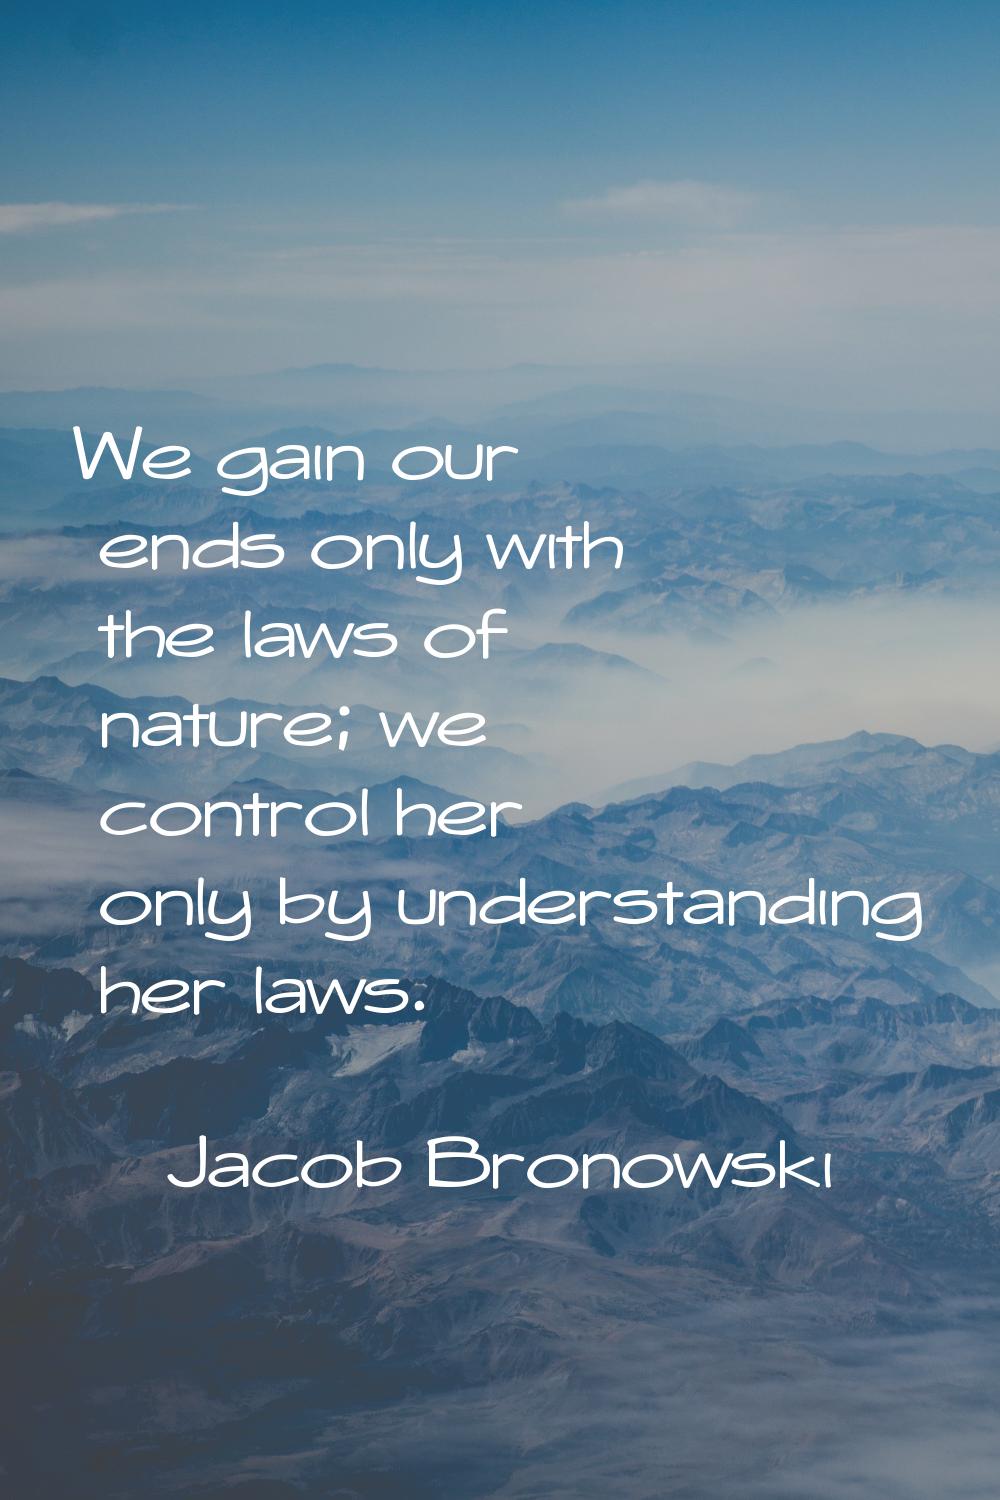 We gain our ends only with the laws of nature; we control her only by understanding her laws.